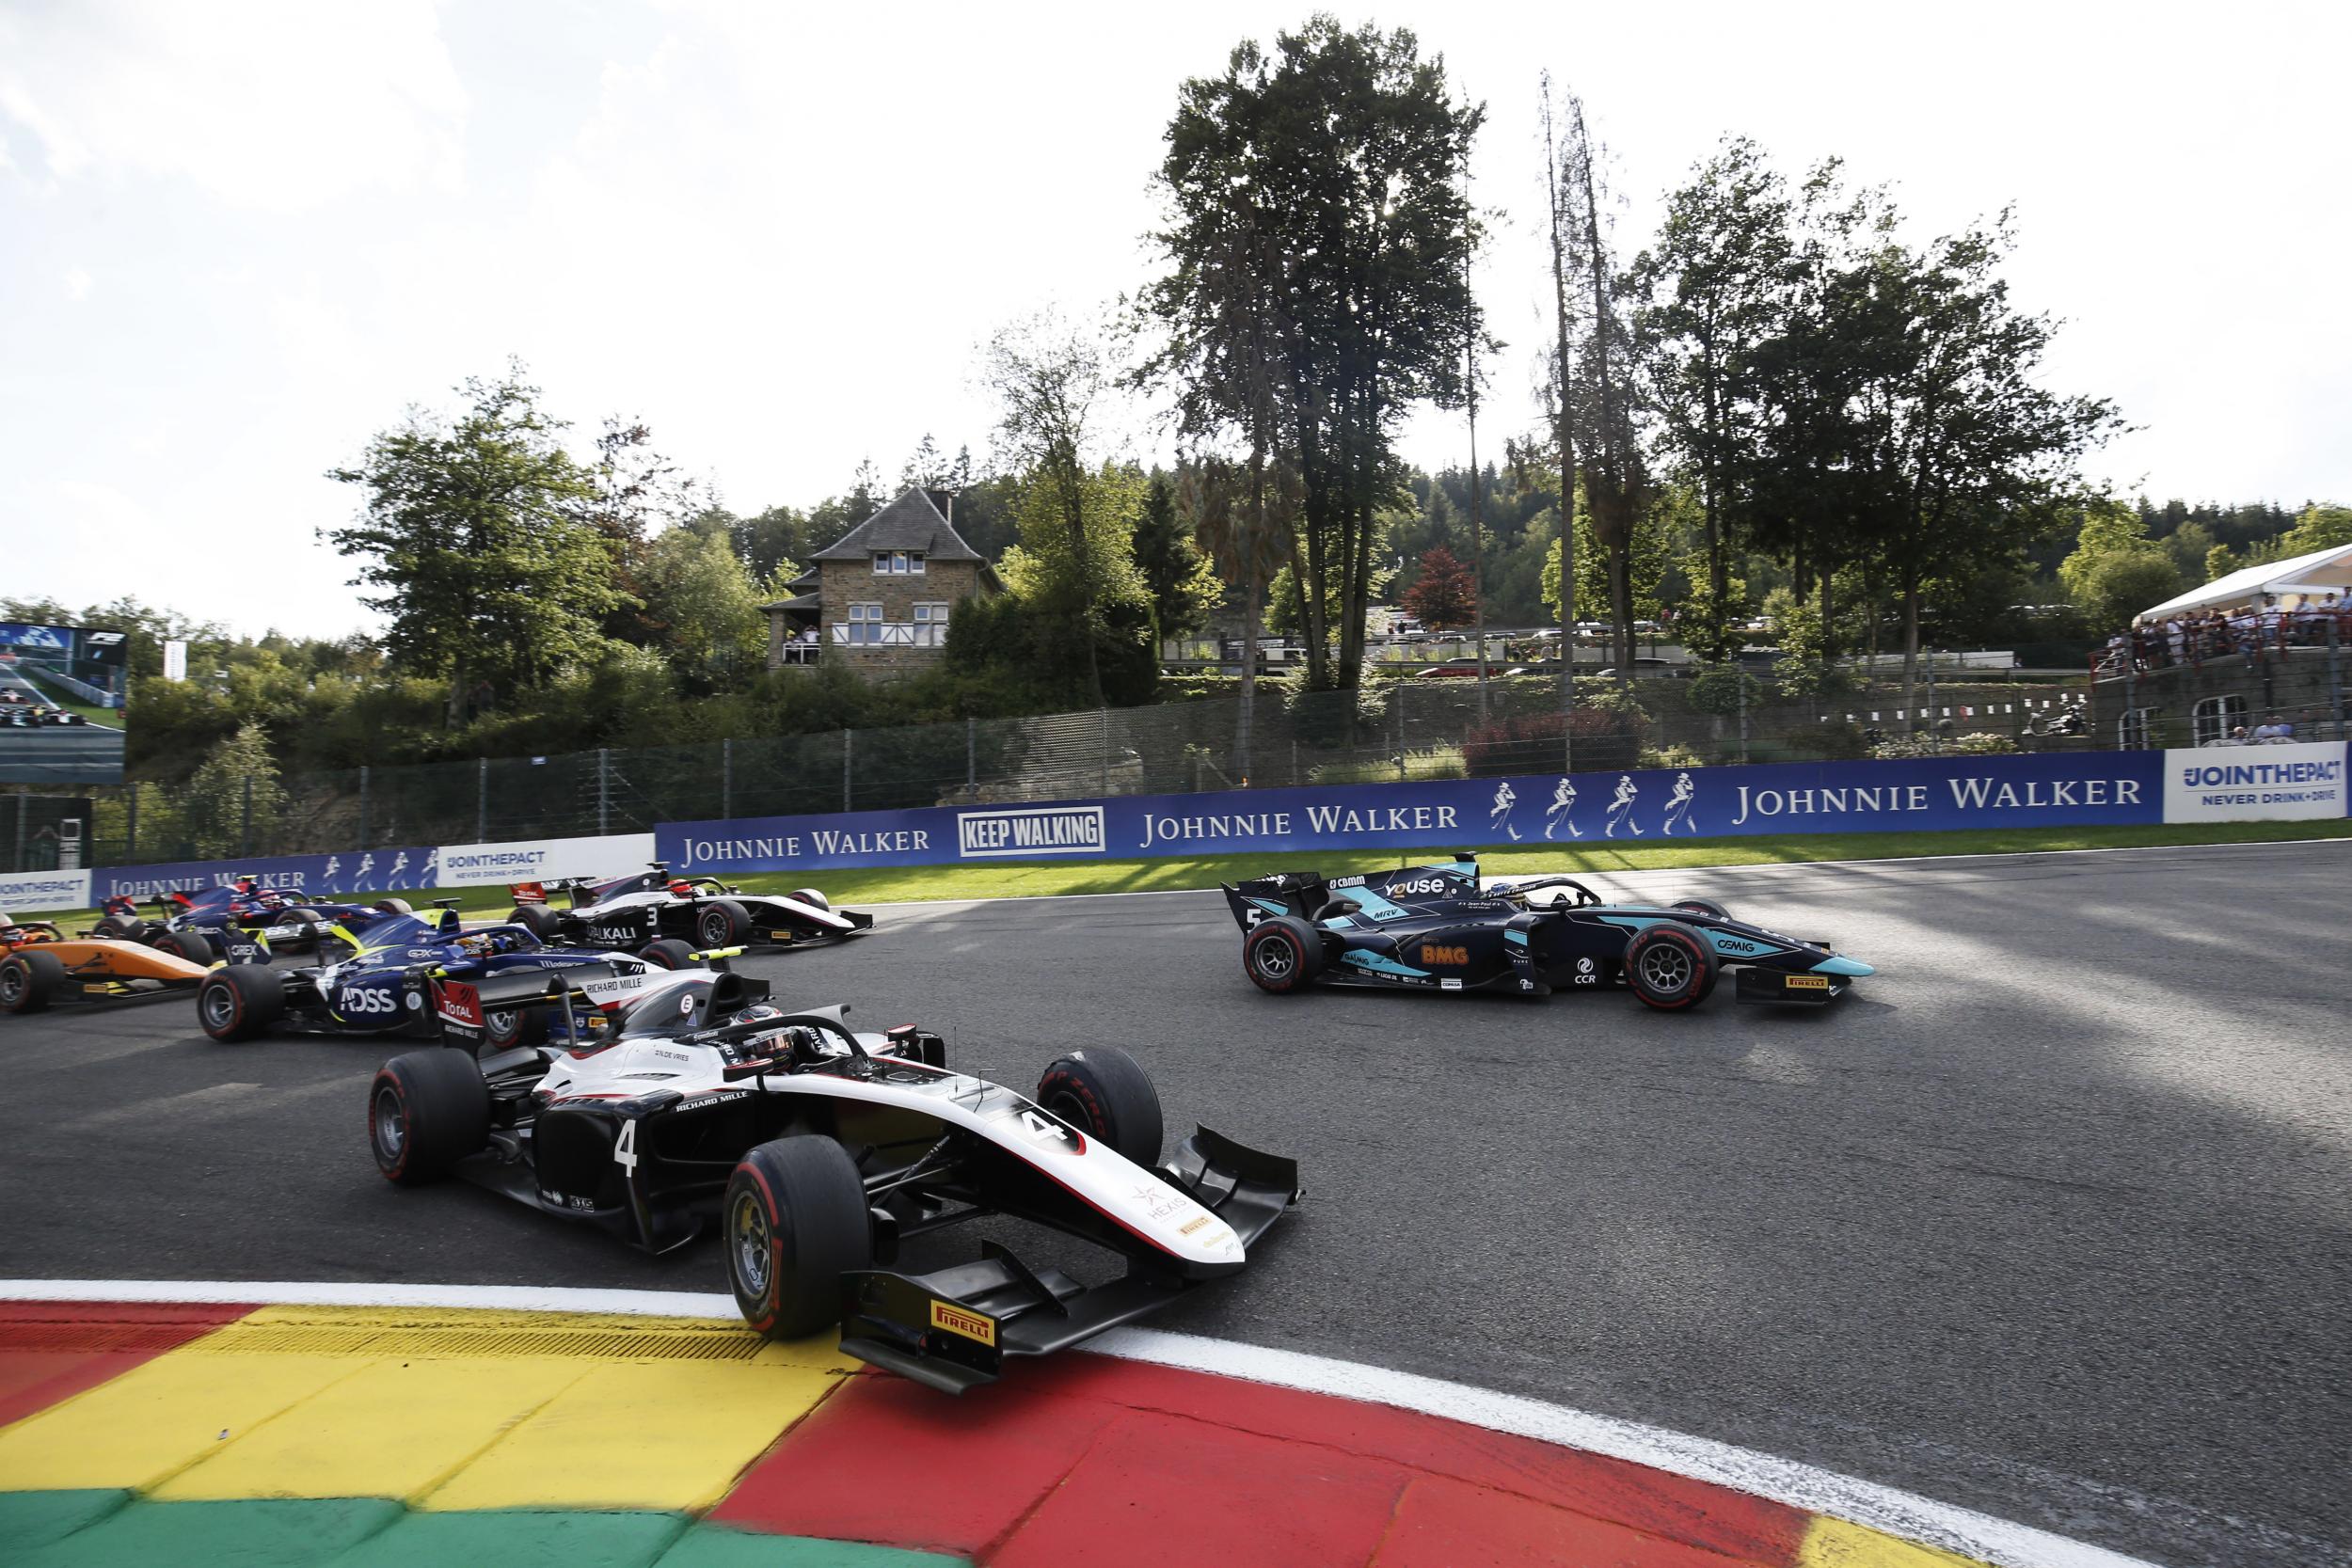 The F2 feature race at Belgium was cancelled as a result of the crash